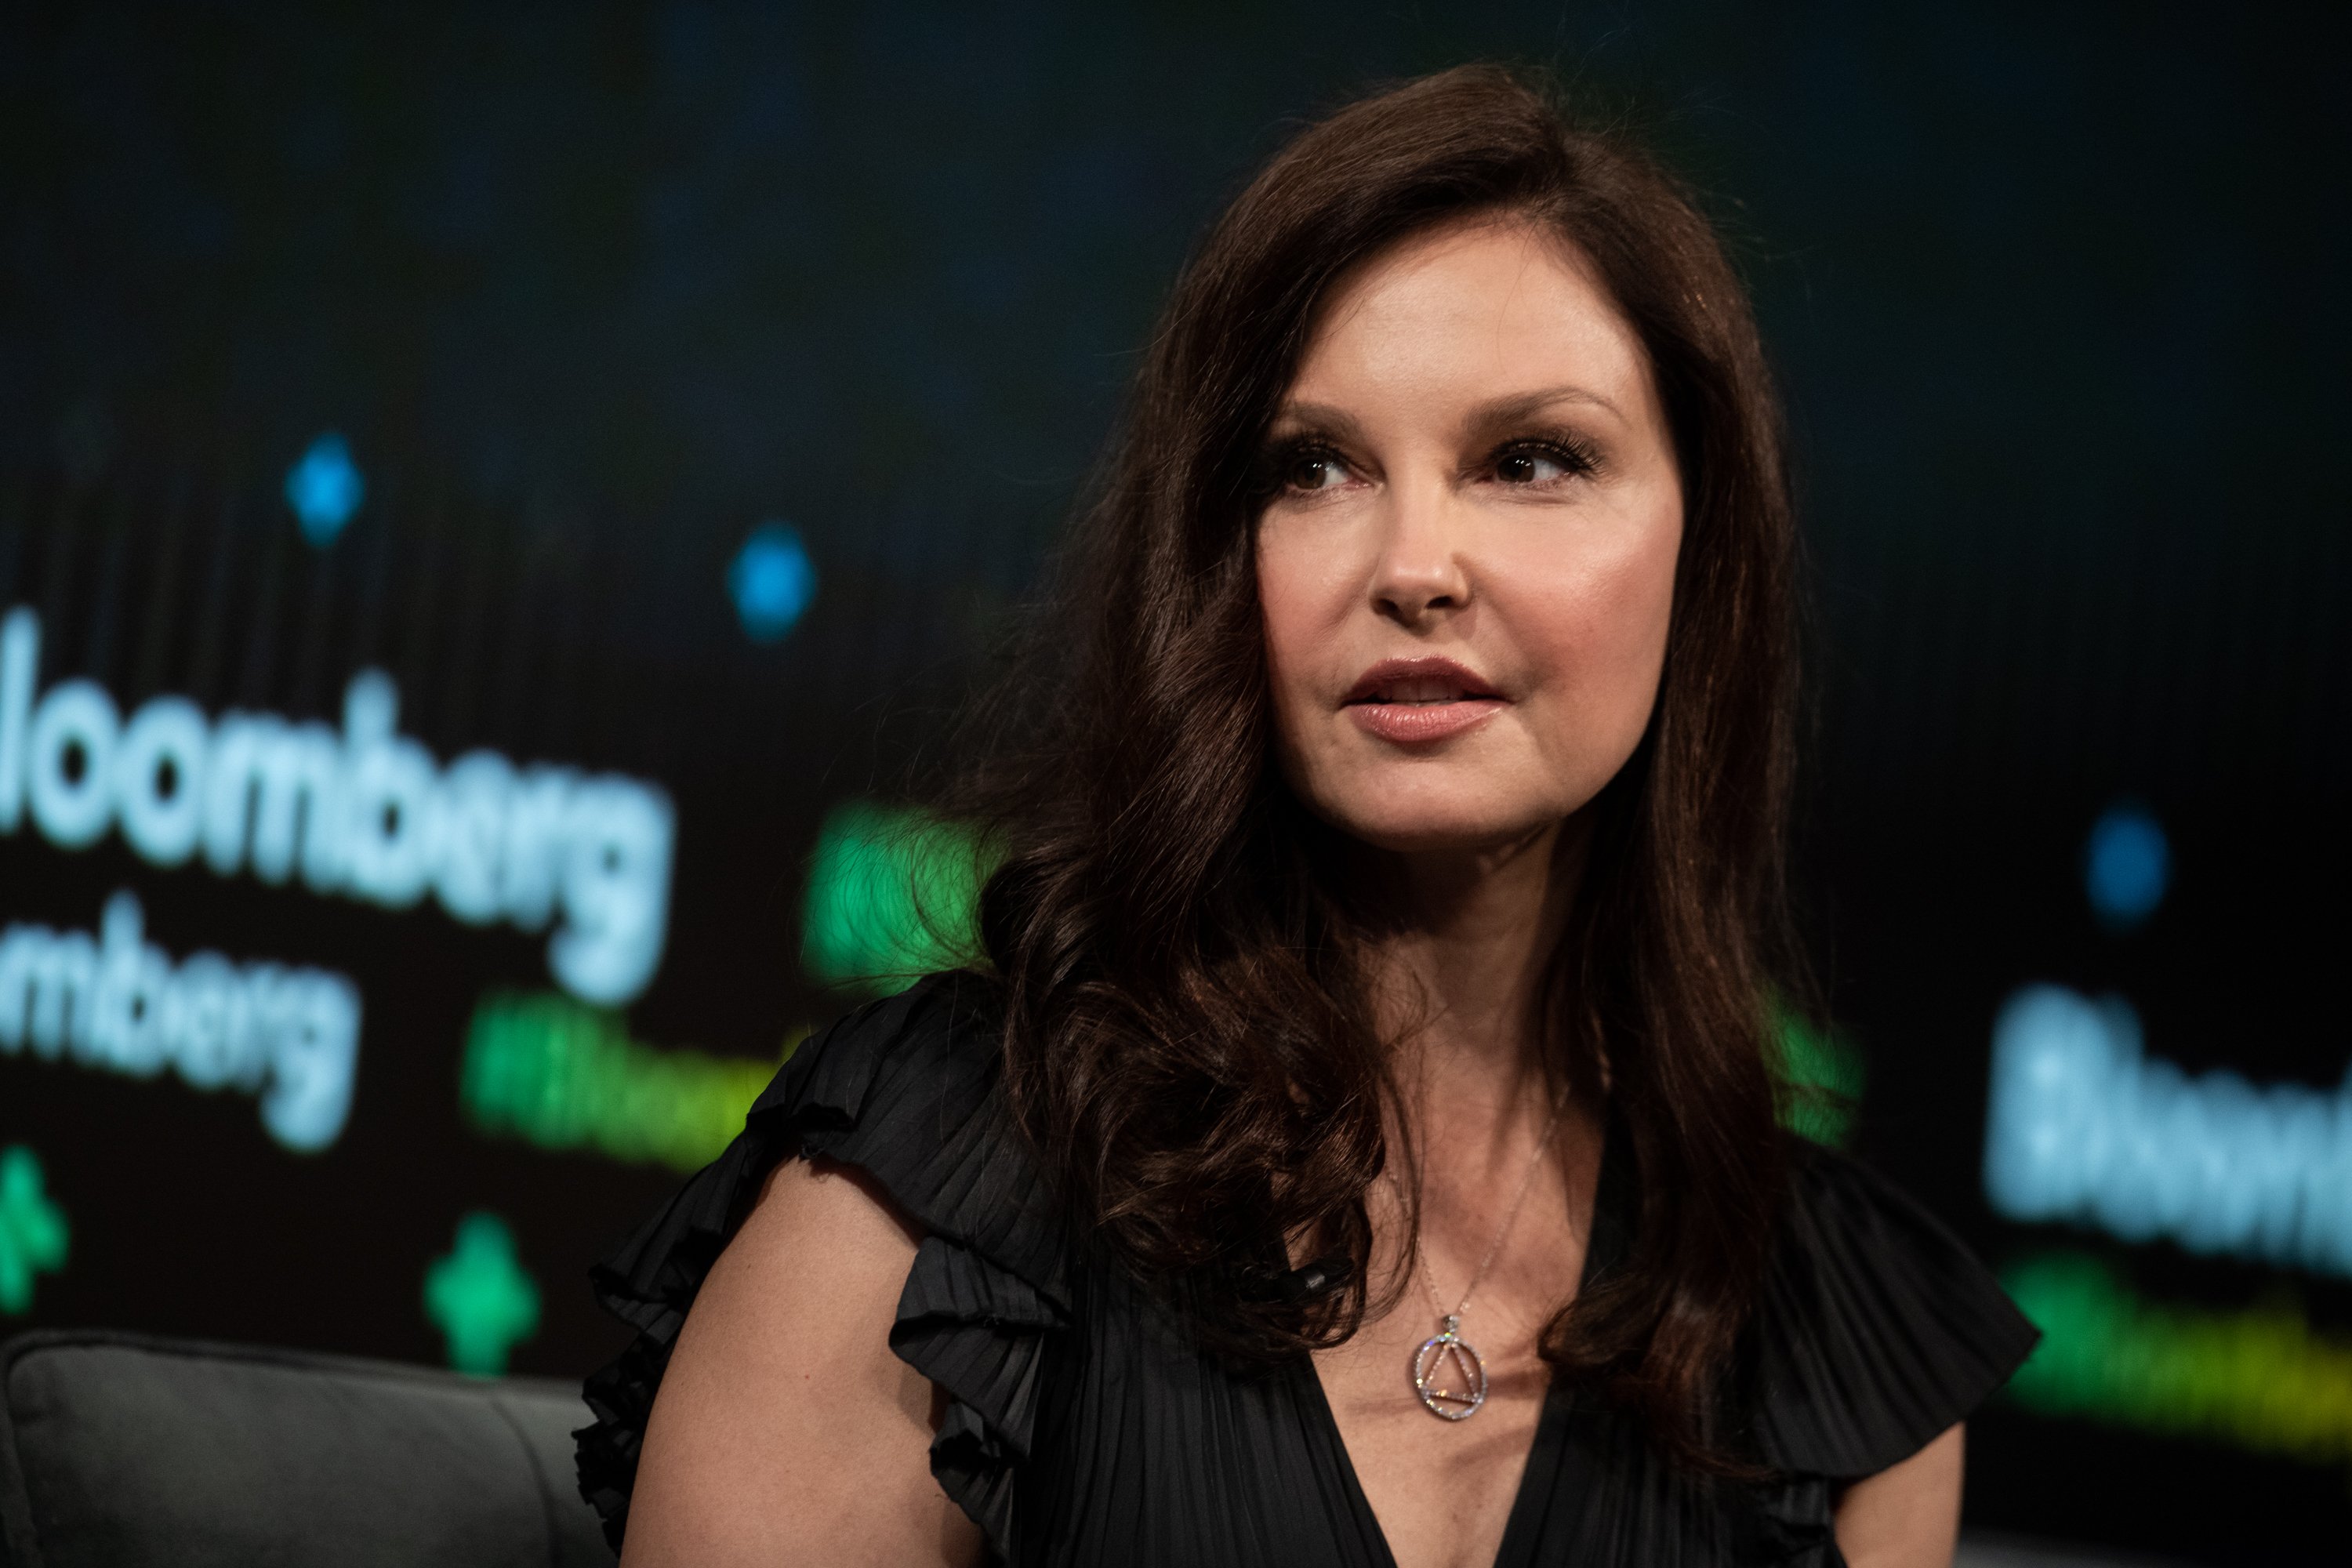 Ashley Judd speaks during the Bloomberg Business of Equality conference in New York, U.S., on May 8, 2018 | Photo: Getty Images